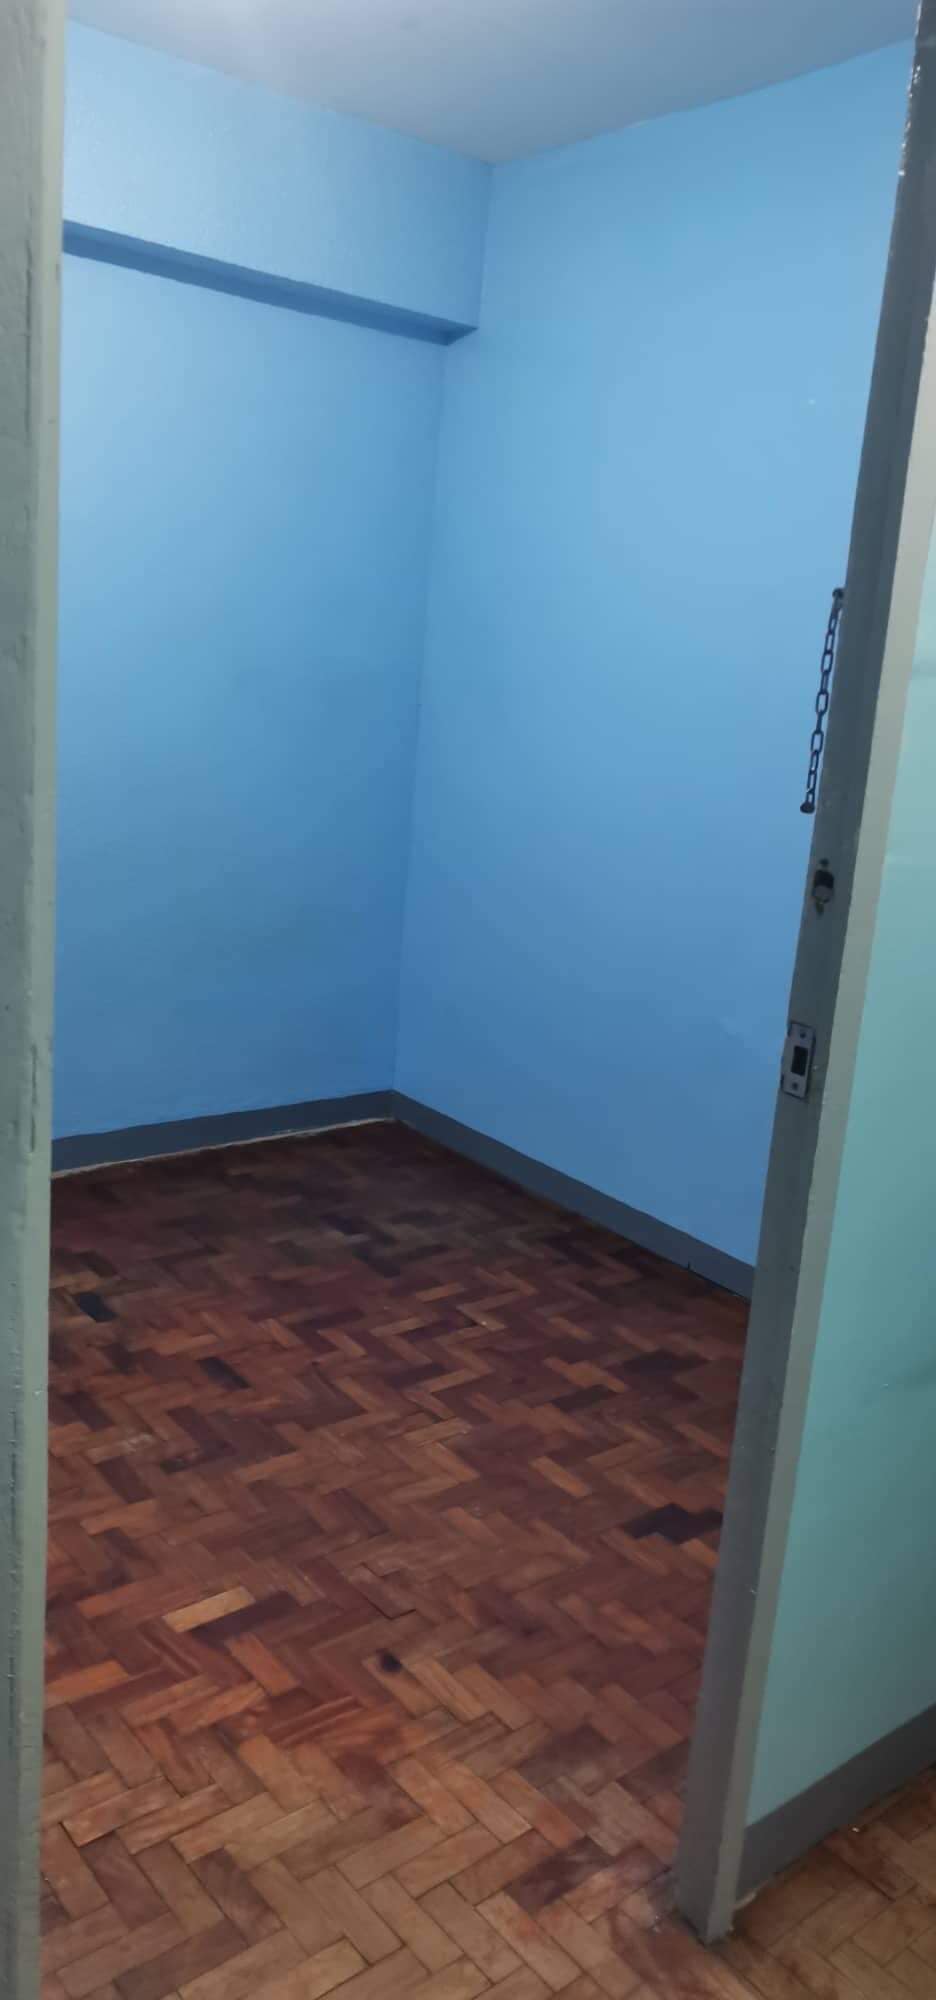 ROOM FOR RENT NEAR MAGALLANES